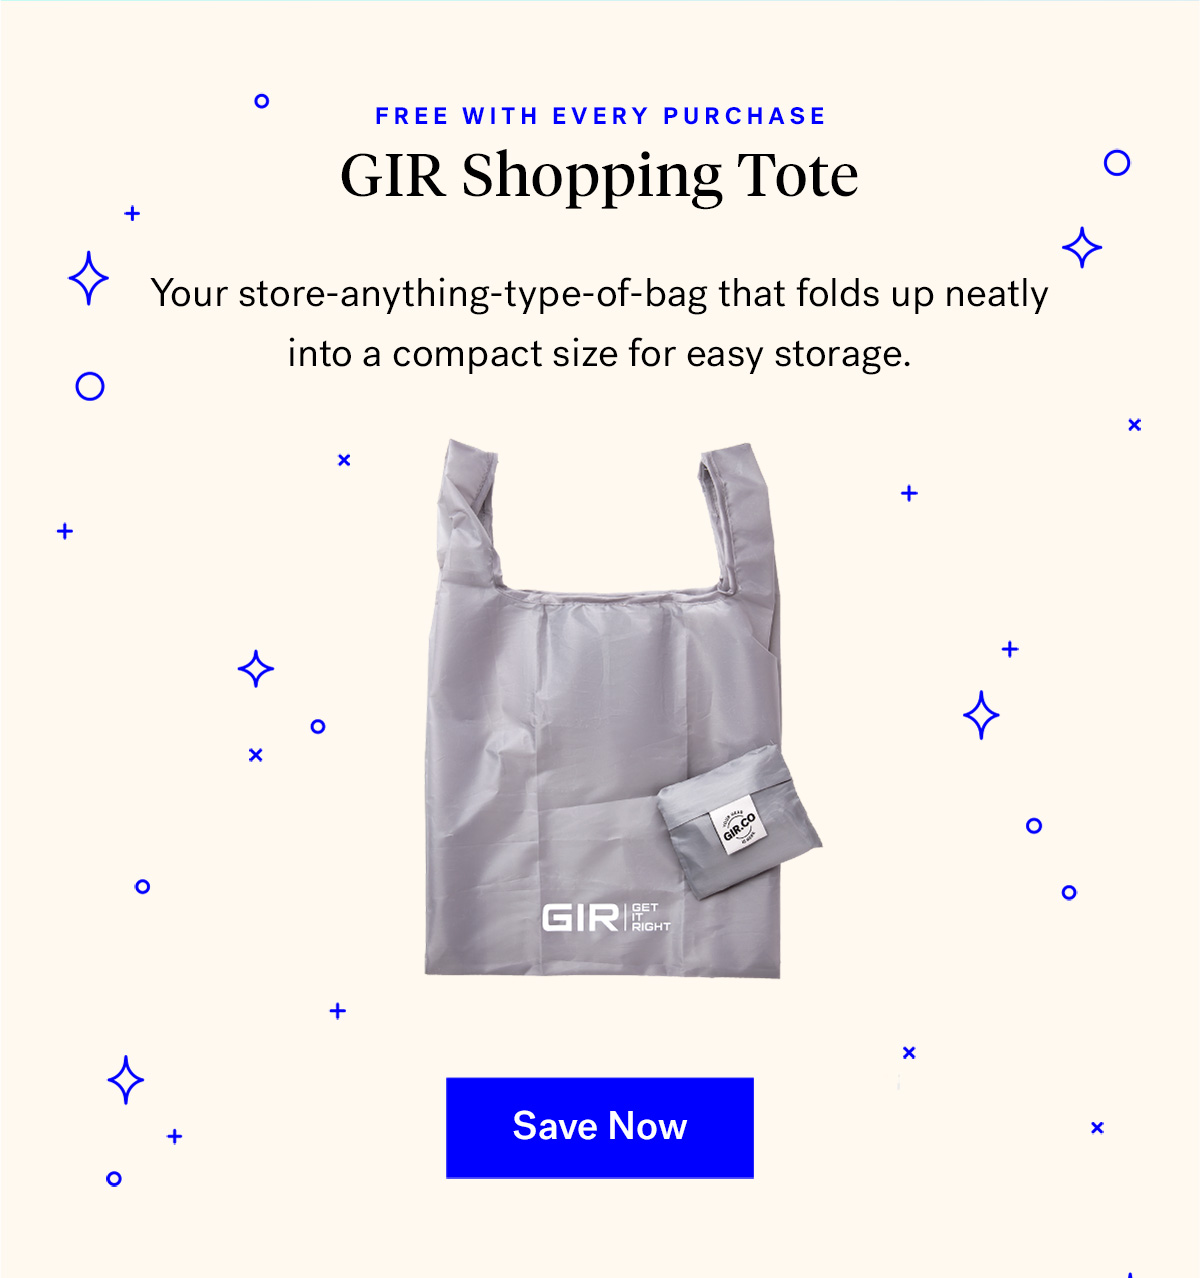  
                               
                                GIR Reusable Shopping Tote (badge for free with every purchase)
                                Your store-anything-type-of-bag that folds up neatly
                                into a compact size for easy storage.



                                Save Now

                                